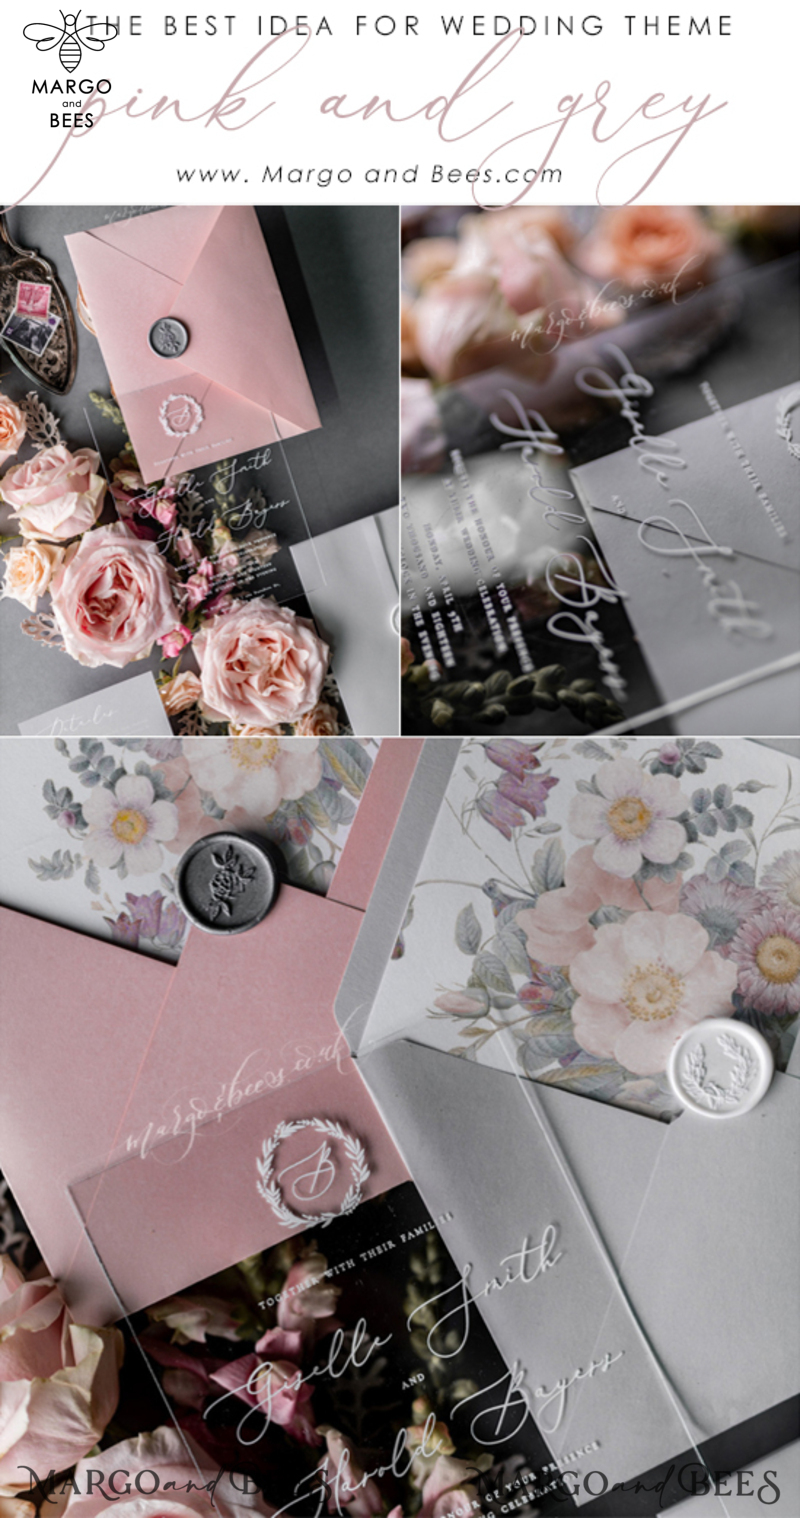 Blossom Personalized Wedding invitations Transparent Stationery with Vellum and Wax Seal -44